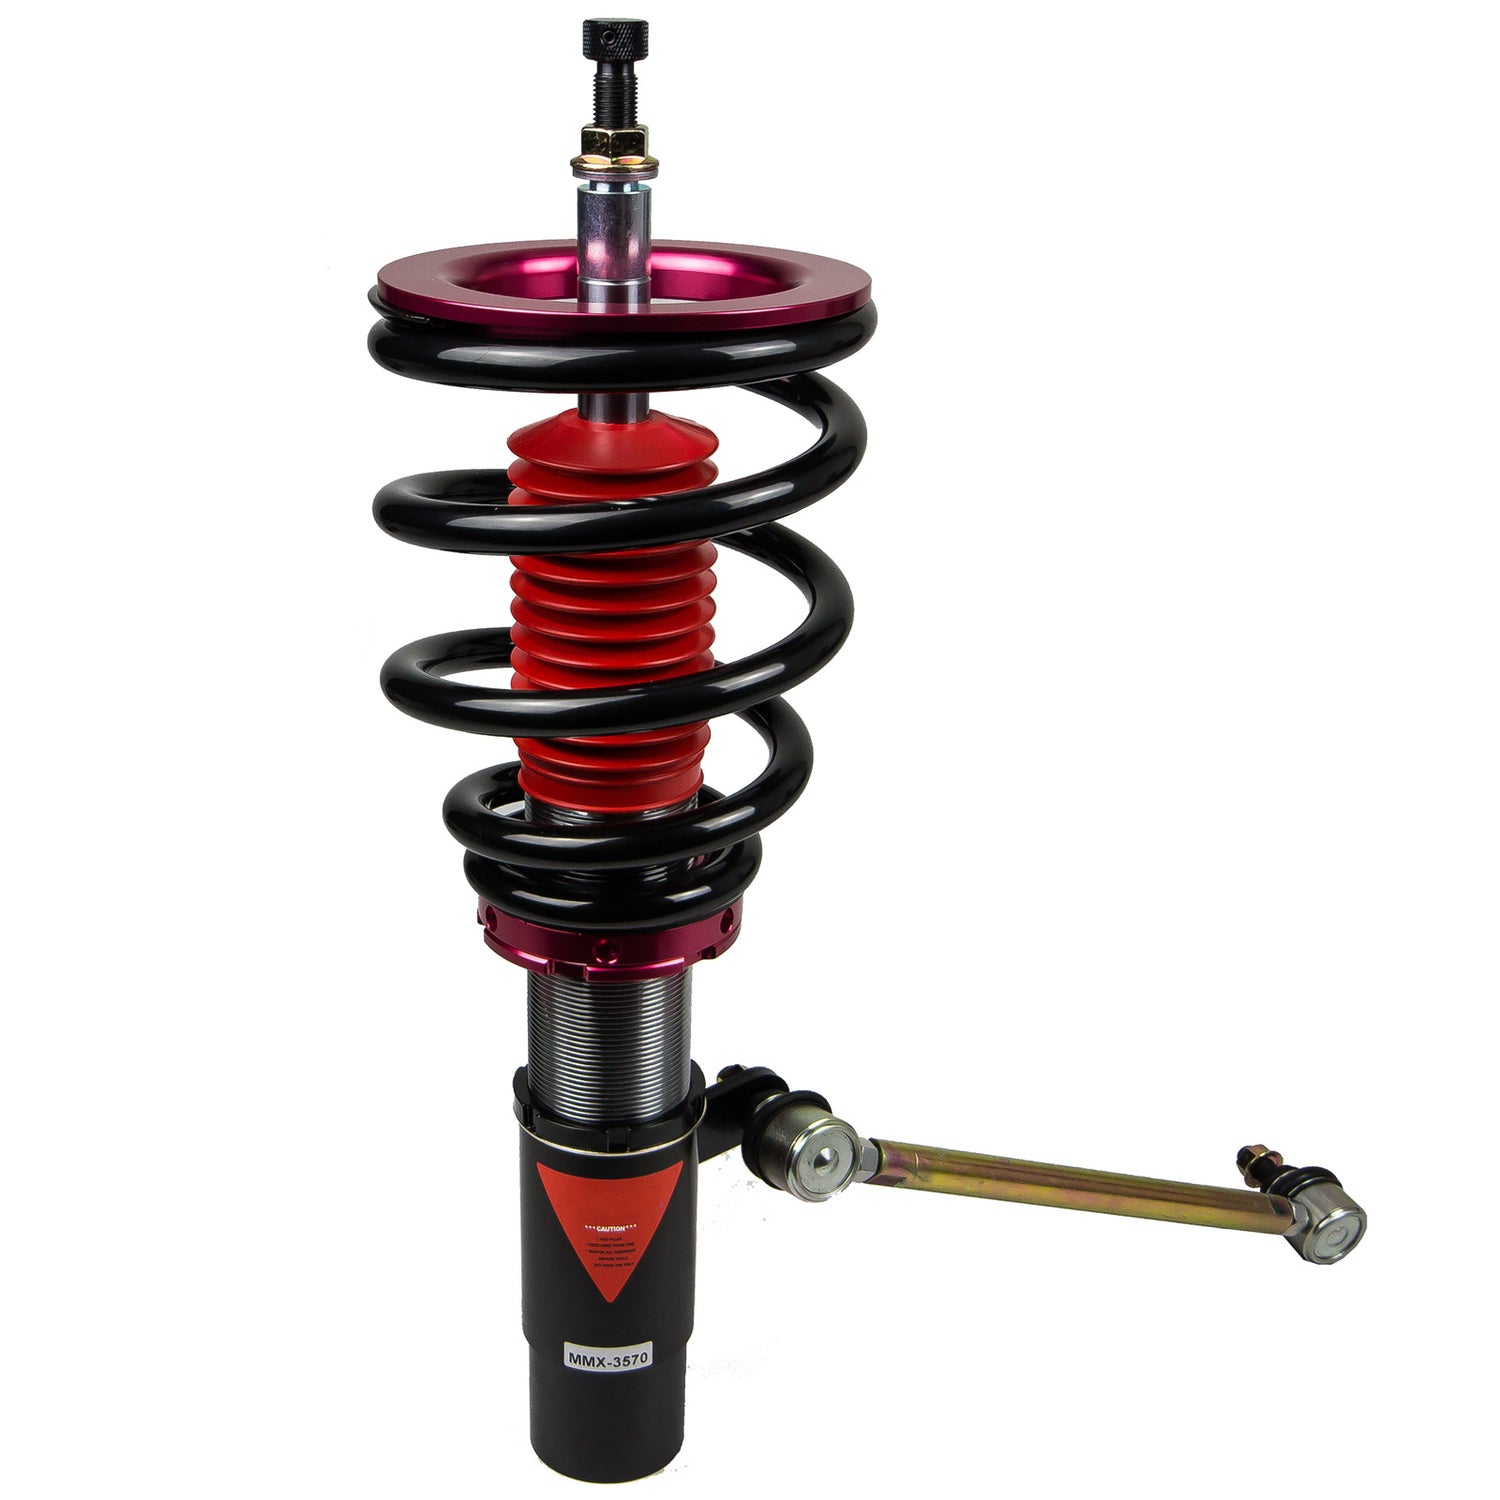 MMX3570 MAXX Coilovers Lowering Kit, Fully Adjustable, Ride Height, 40 Clicks Rebound Settings, MINI Cooper S(F56) 2014-18(w/o DDC)